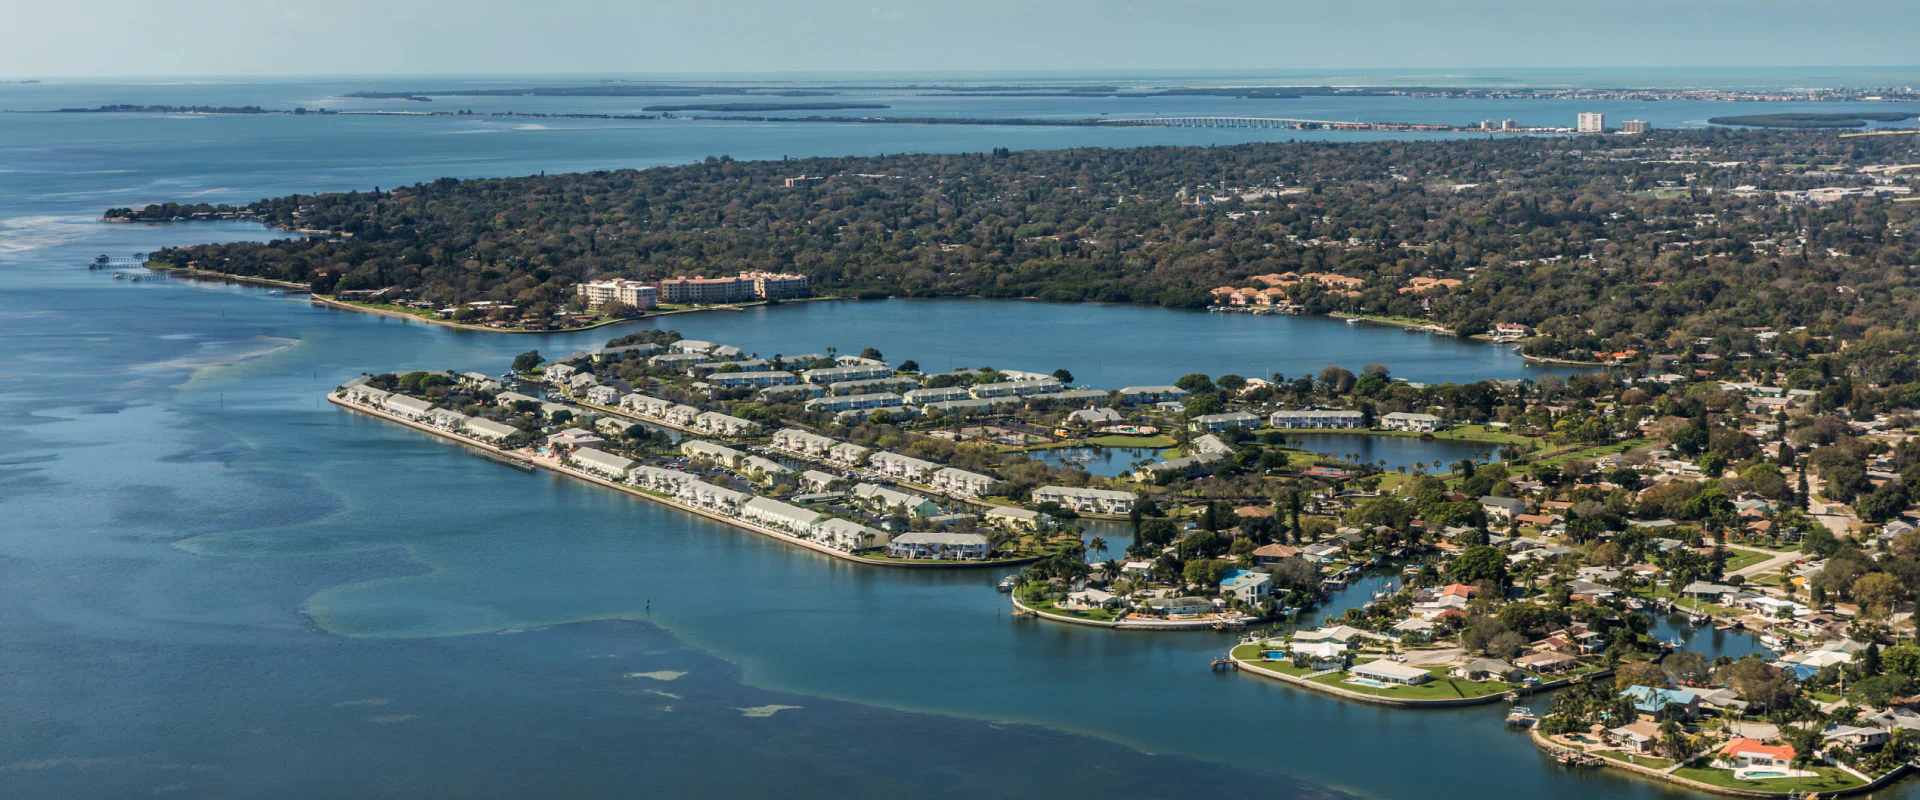 aerial view of city and gulf of marina village and resort cape coral fl